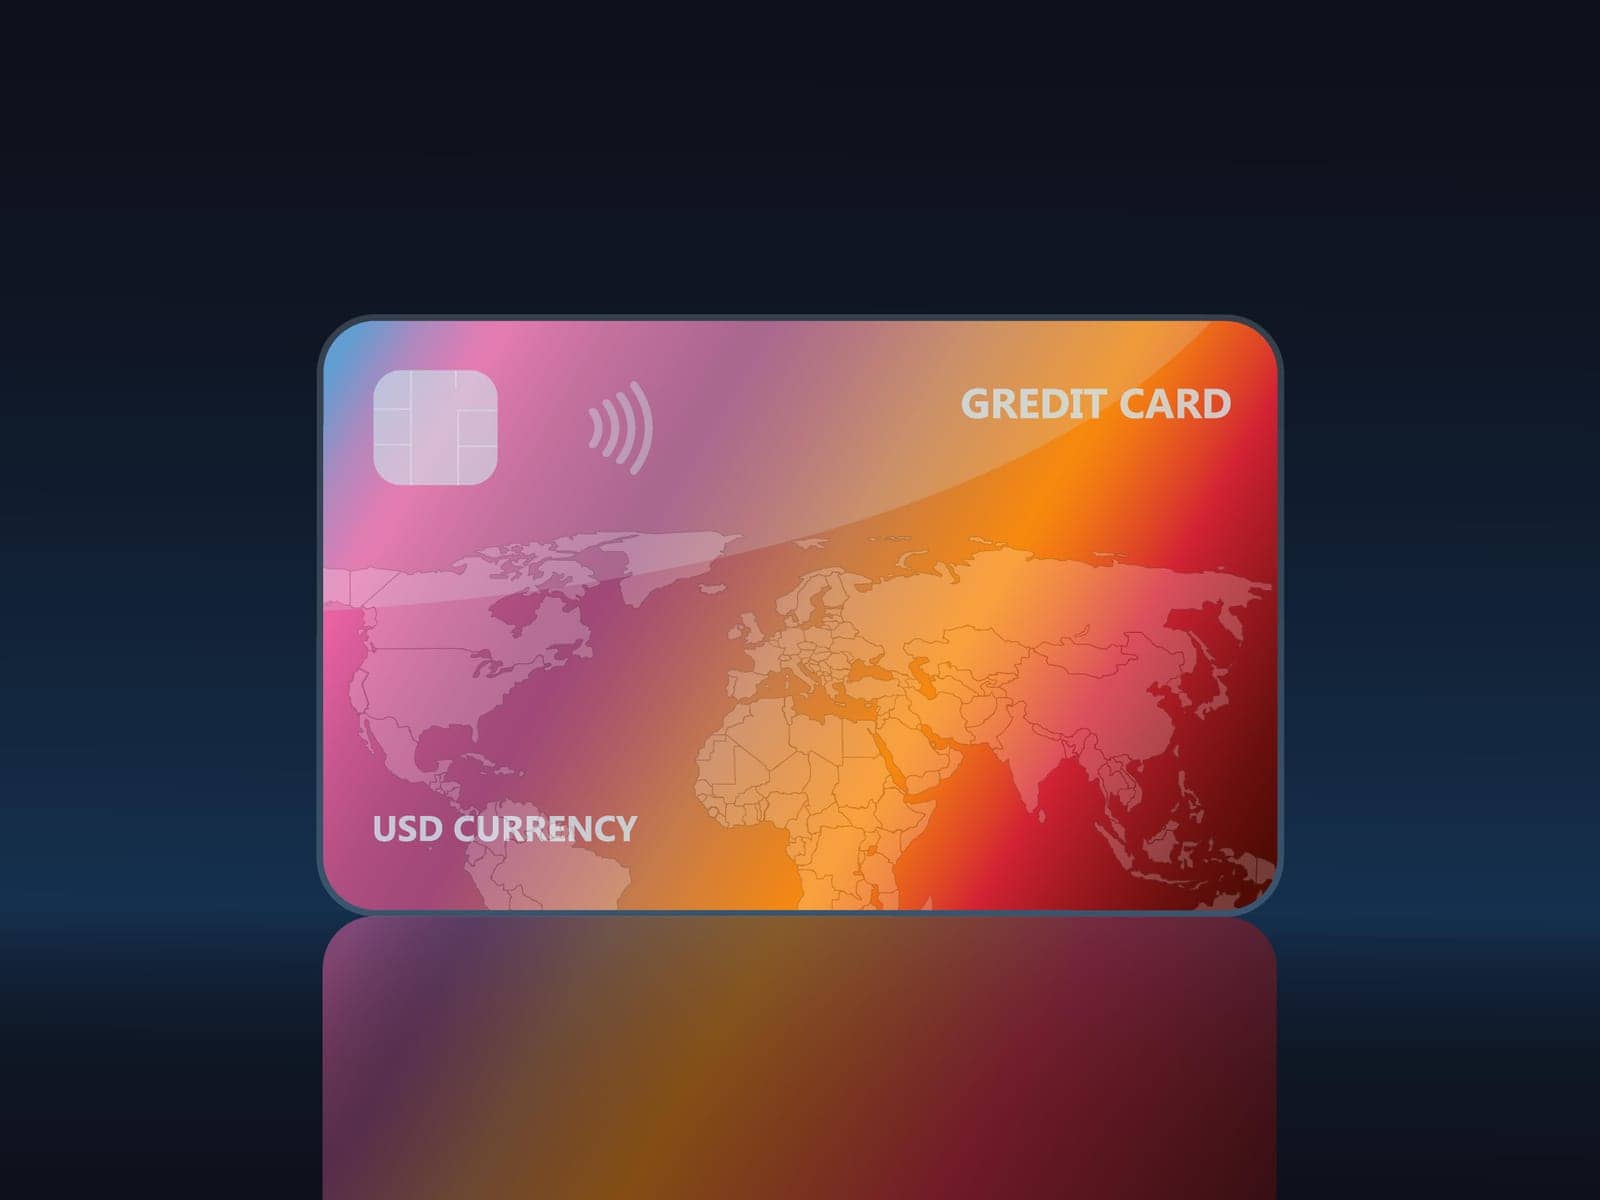 Credit card template. Gradient bright card on a dark background with specular reflection.